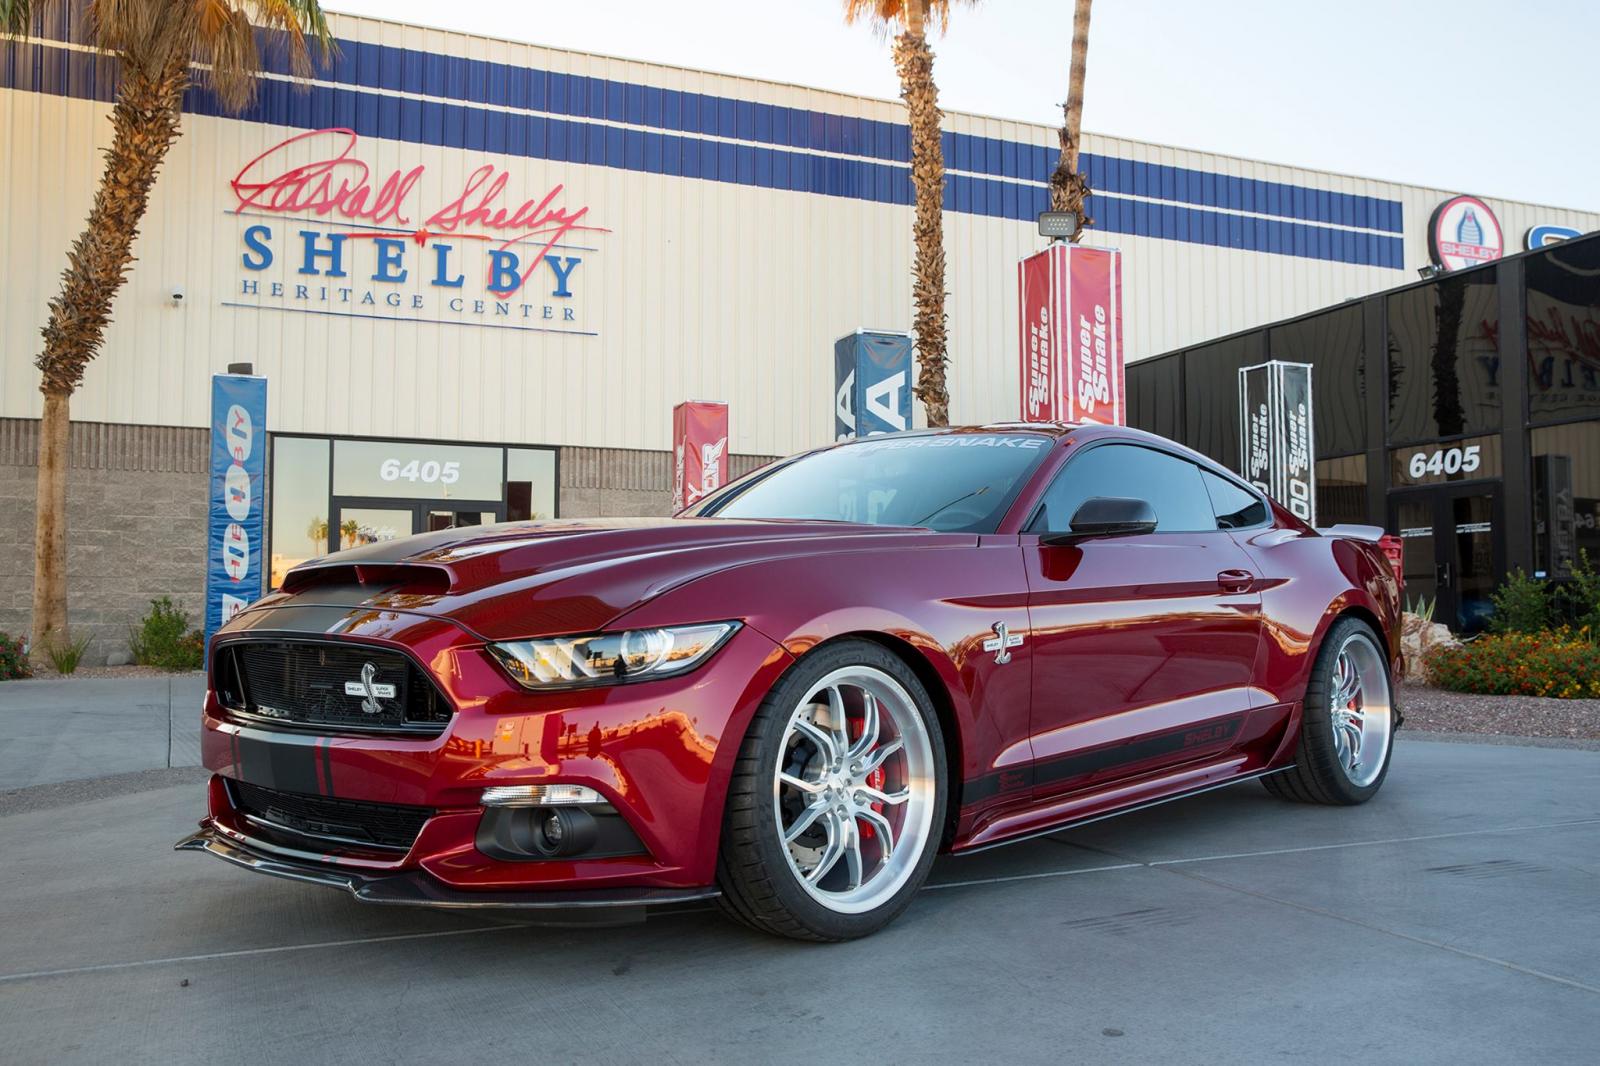 2018 Ford Mustang Shelby GT500 Super Snake | Reviews ...